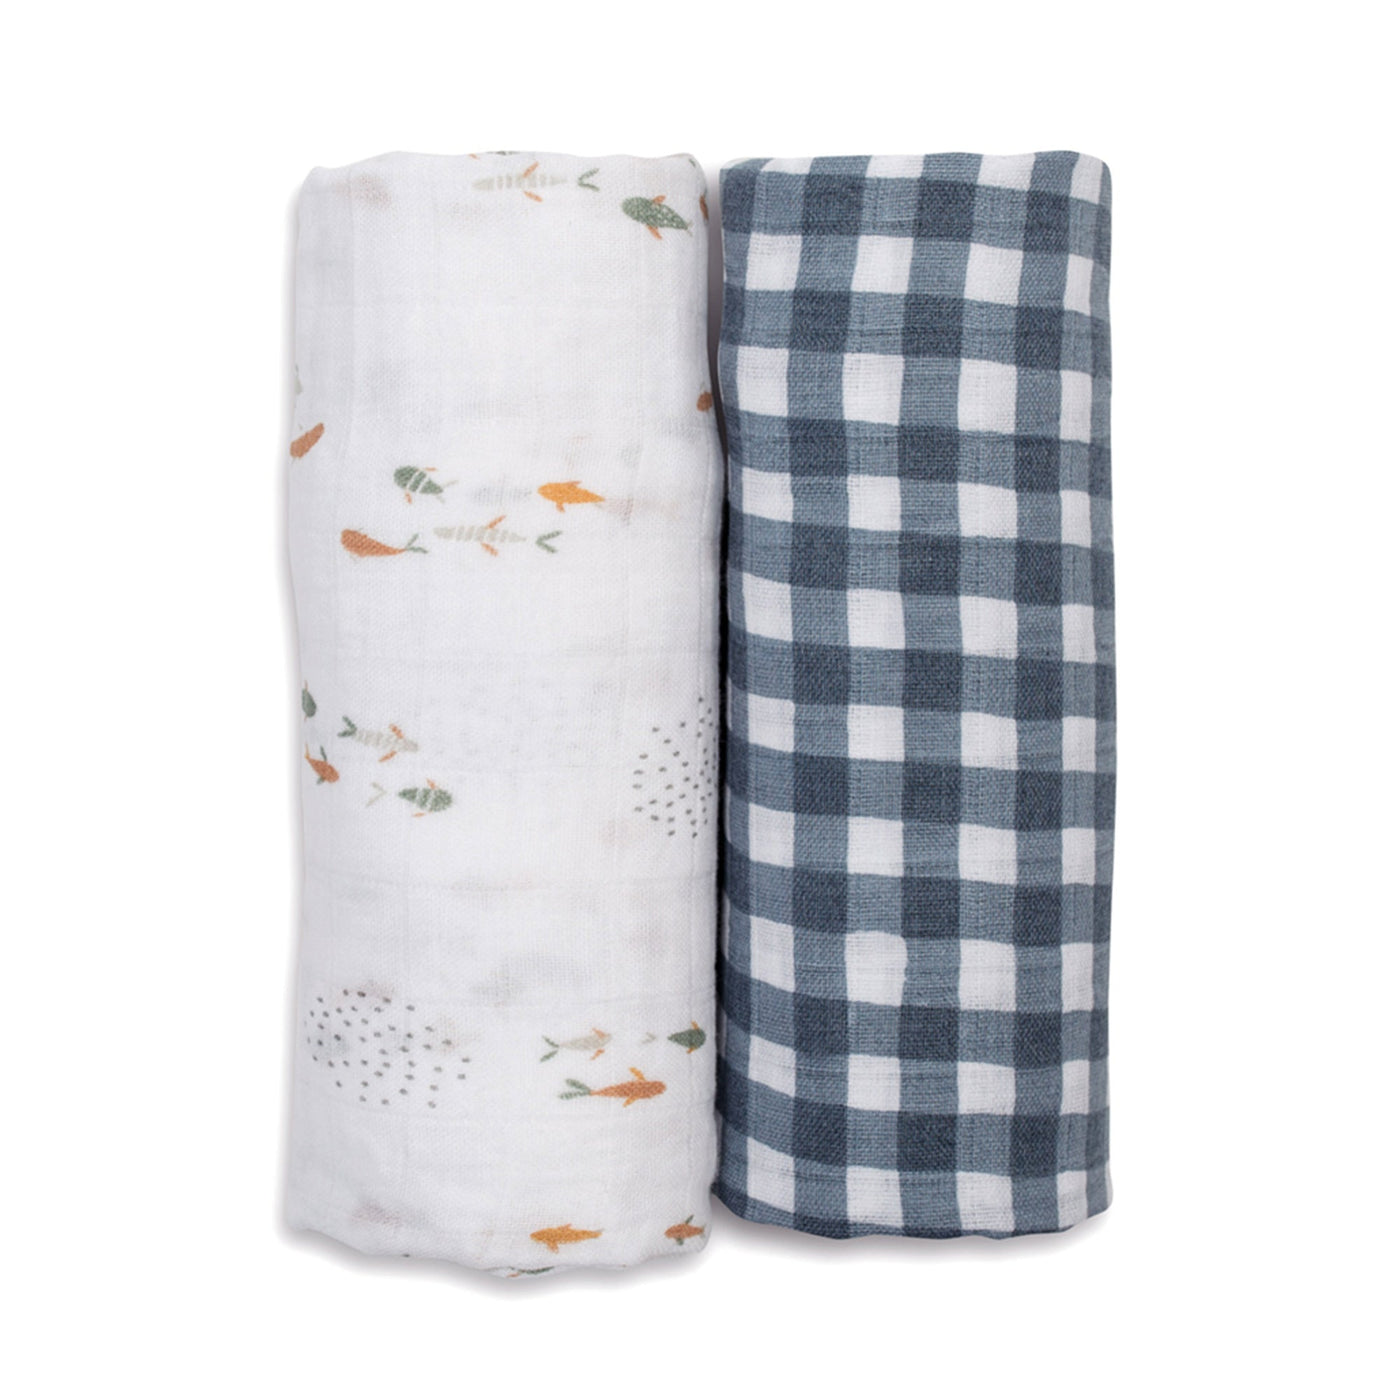 Lulujo - Cotton Swaddle - Fish / Navy Gingham - 2 Pack